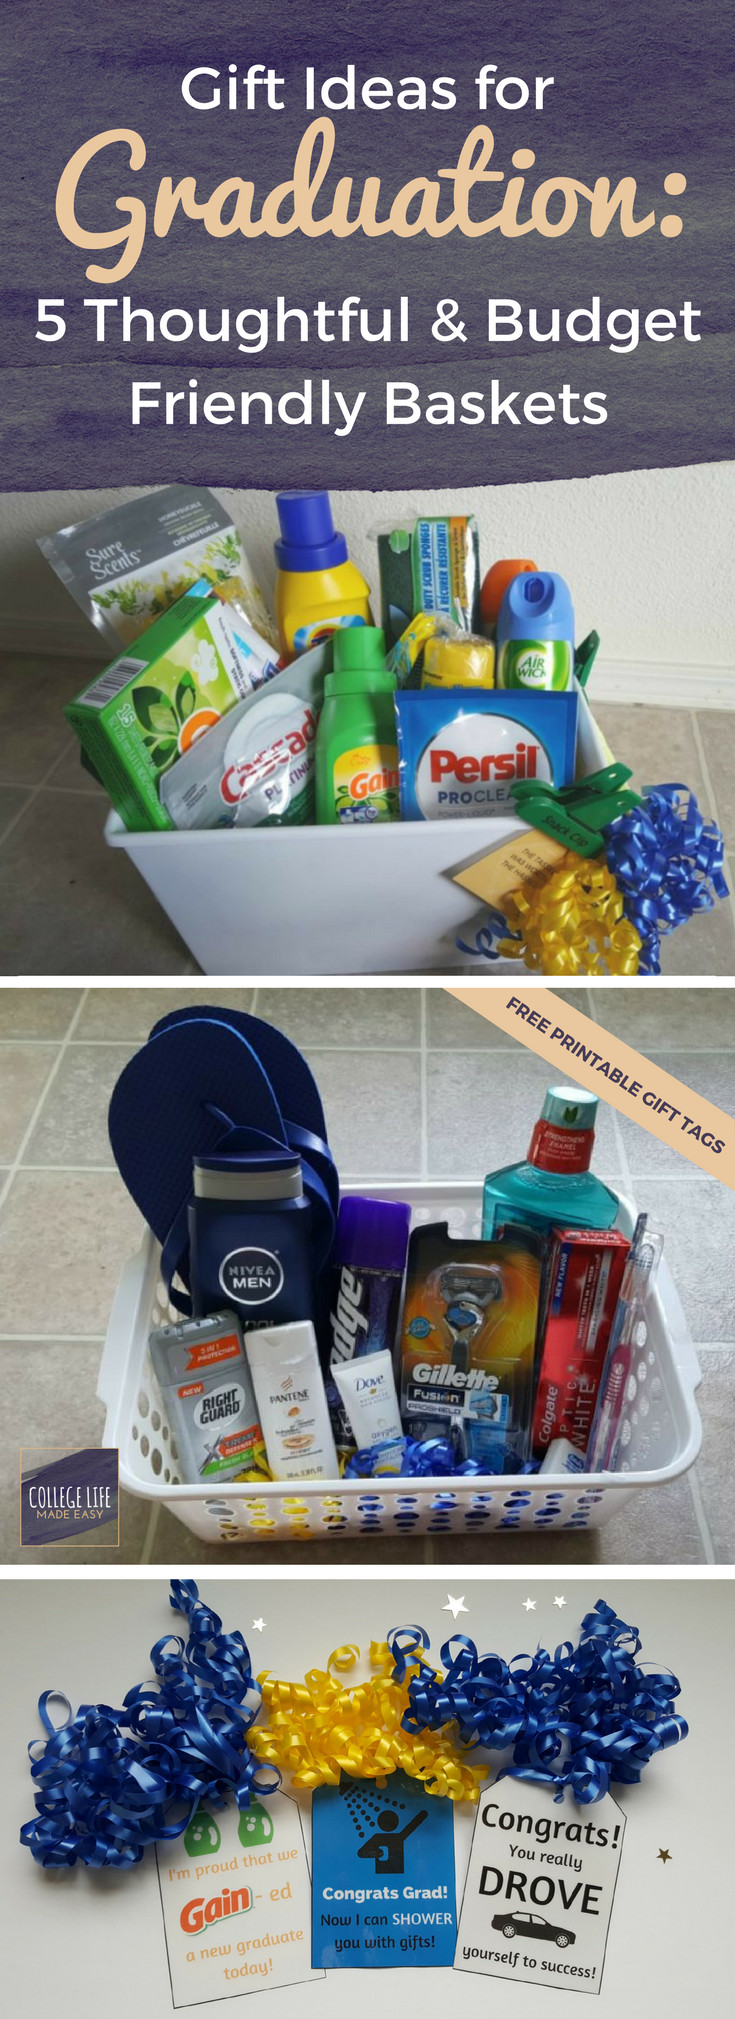 Girlfriend Graduation Gift Ideas
 5 DIY Going Away to College Gift Basket Ideas for Boys